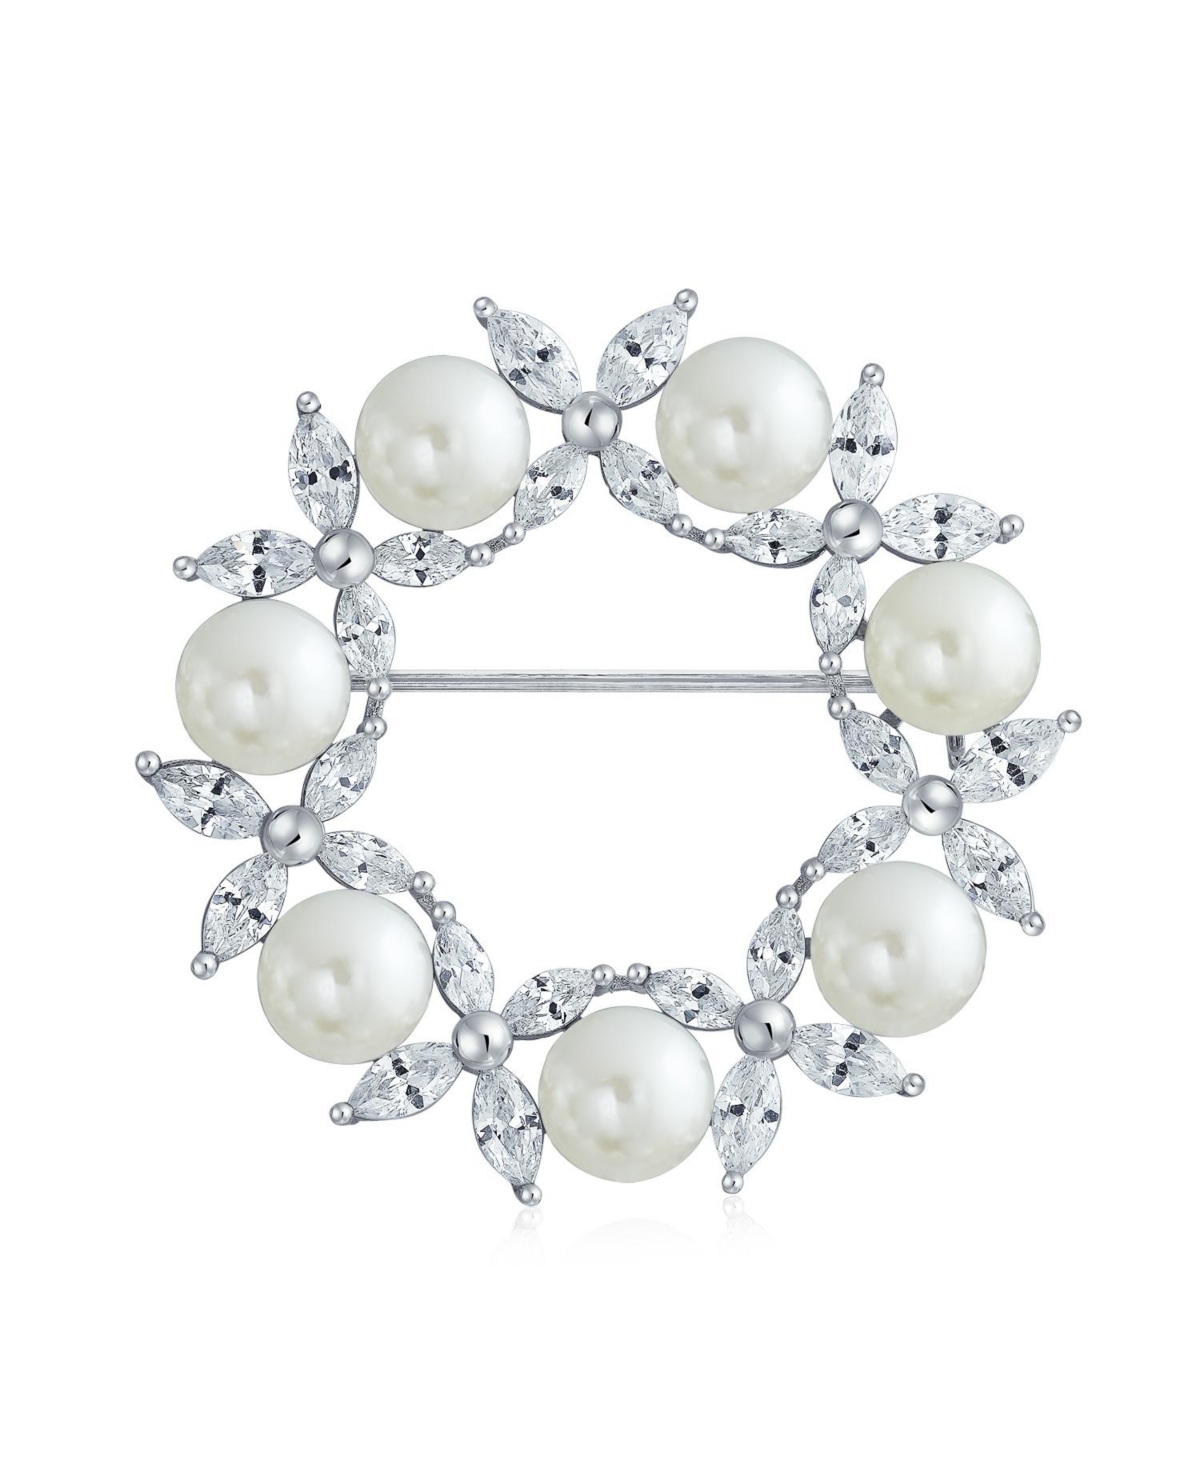 Elegant Bridal Holiday Marquise Cz Cubic Zirconia Round 8MM White Simulated Pearl Wreath Circle Scarf Brooch Pin For Women Wedding - Clear